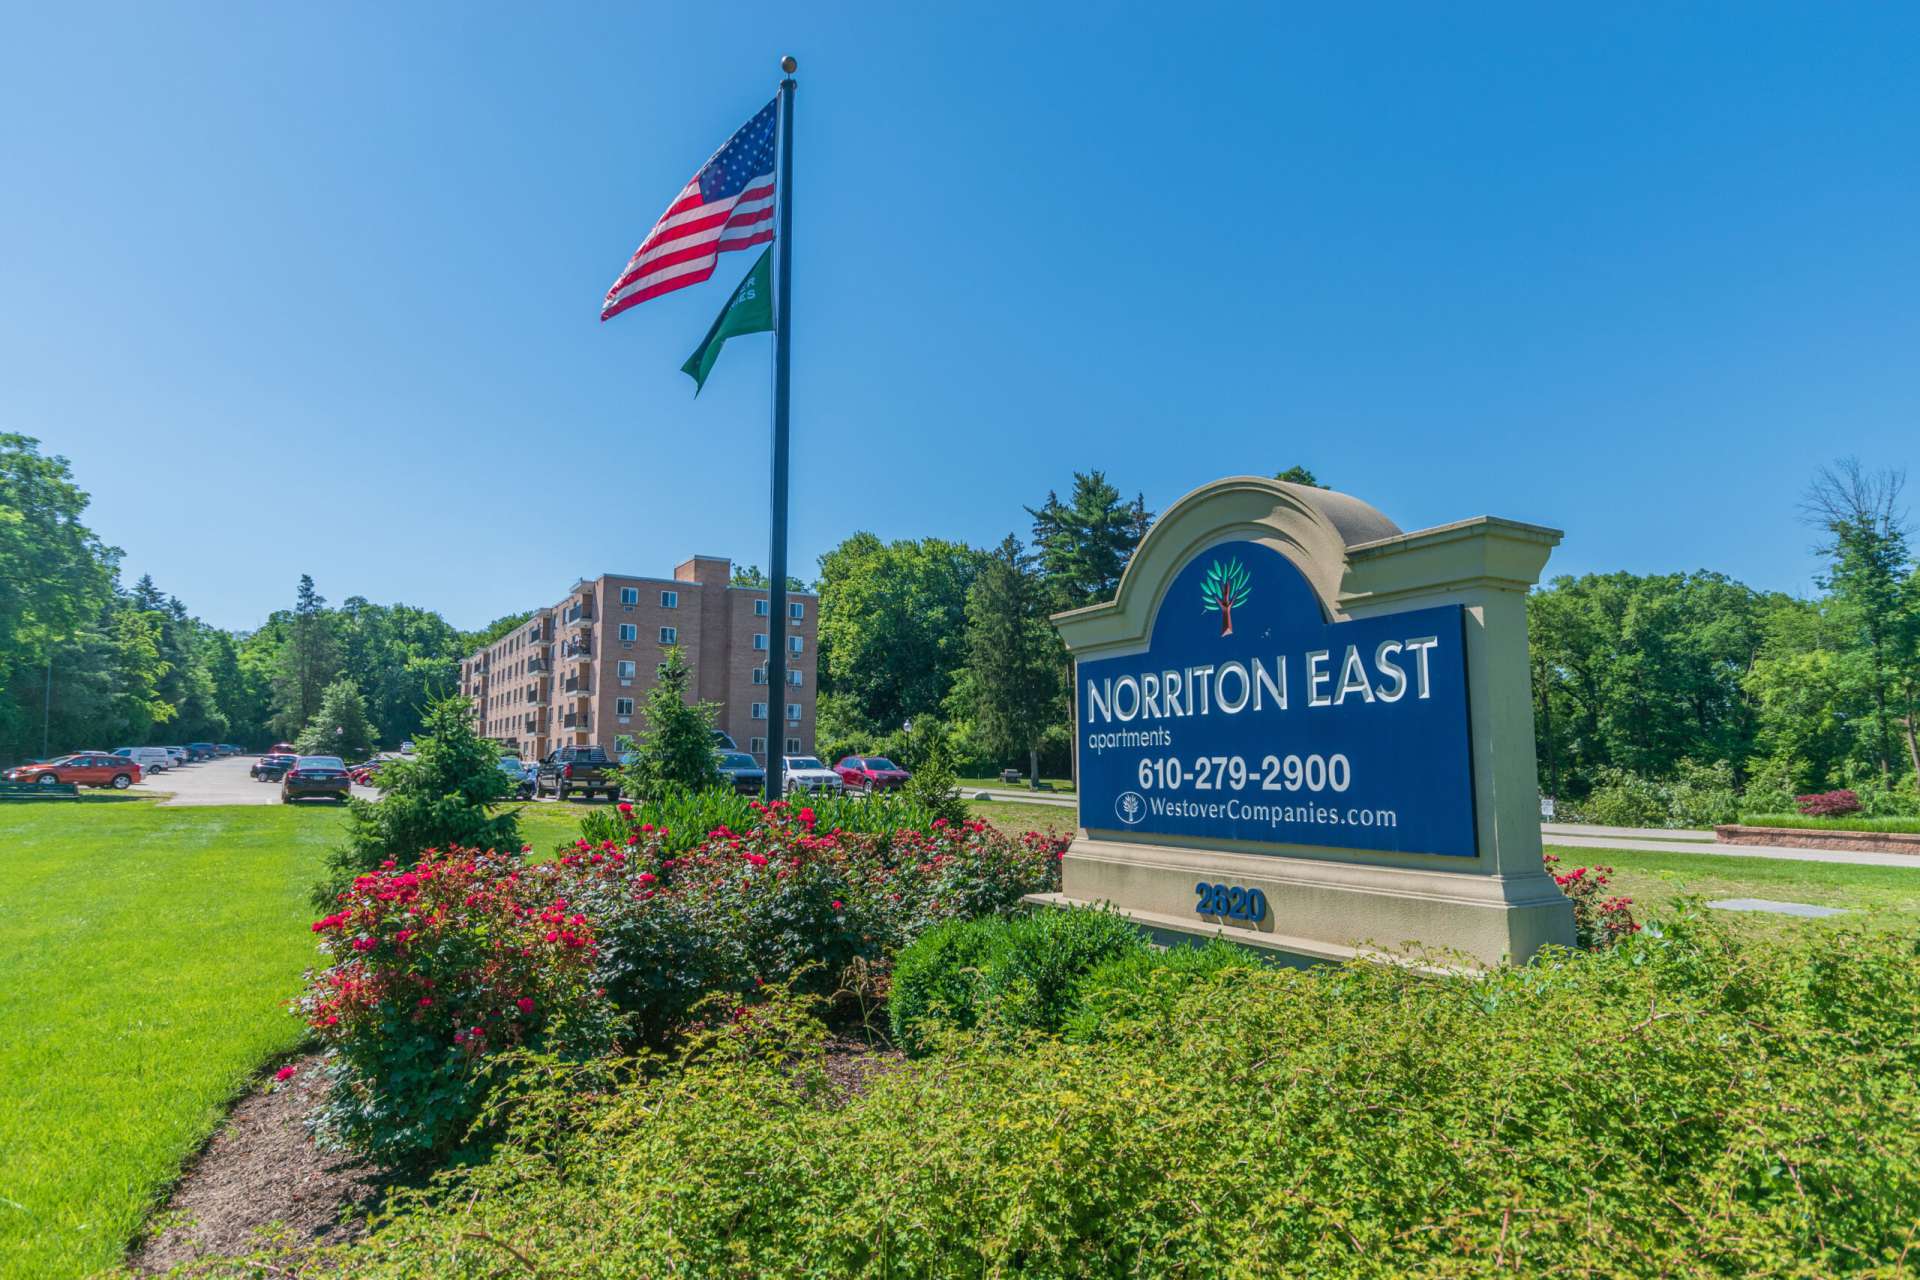 Norriton East Apartments sign with a variety of plants and bushes.